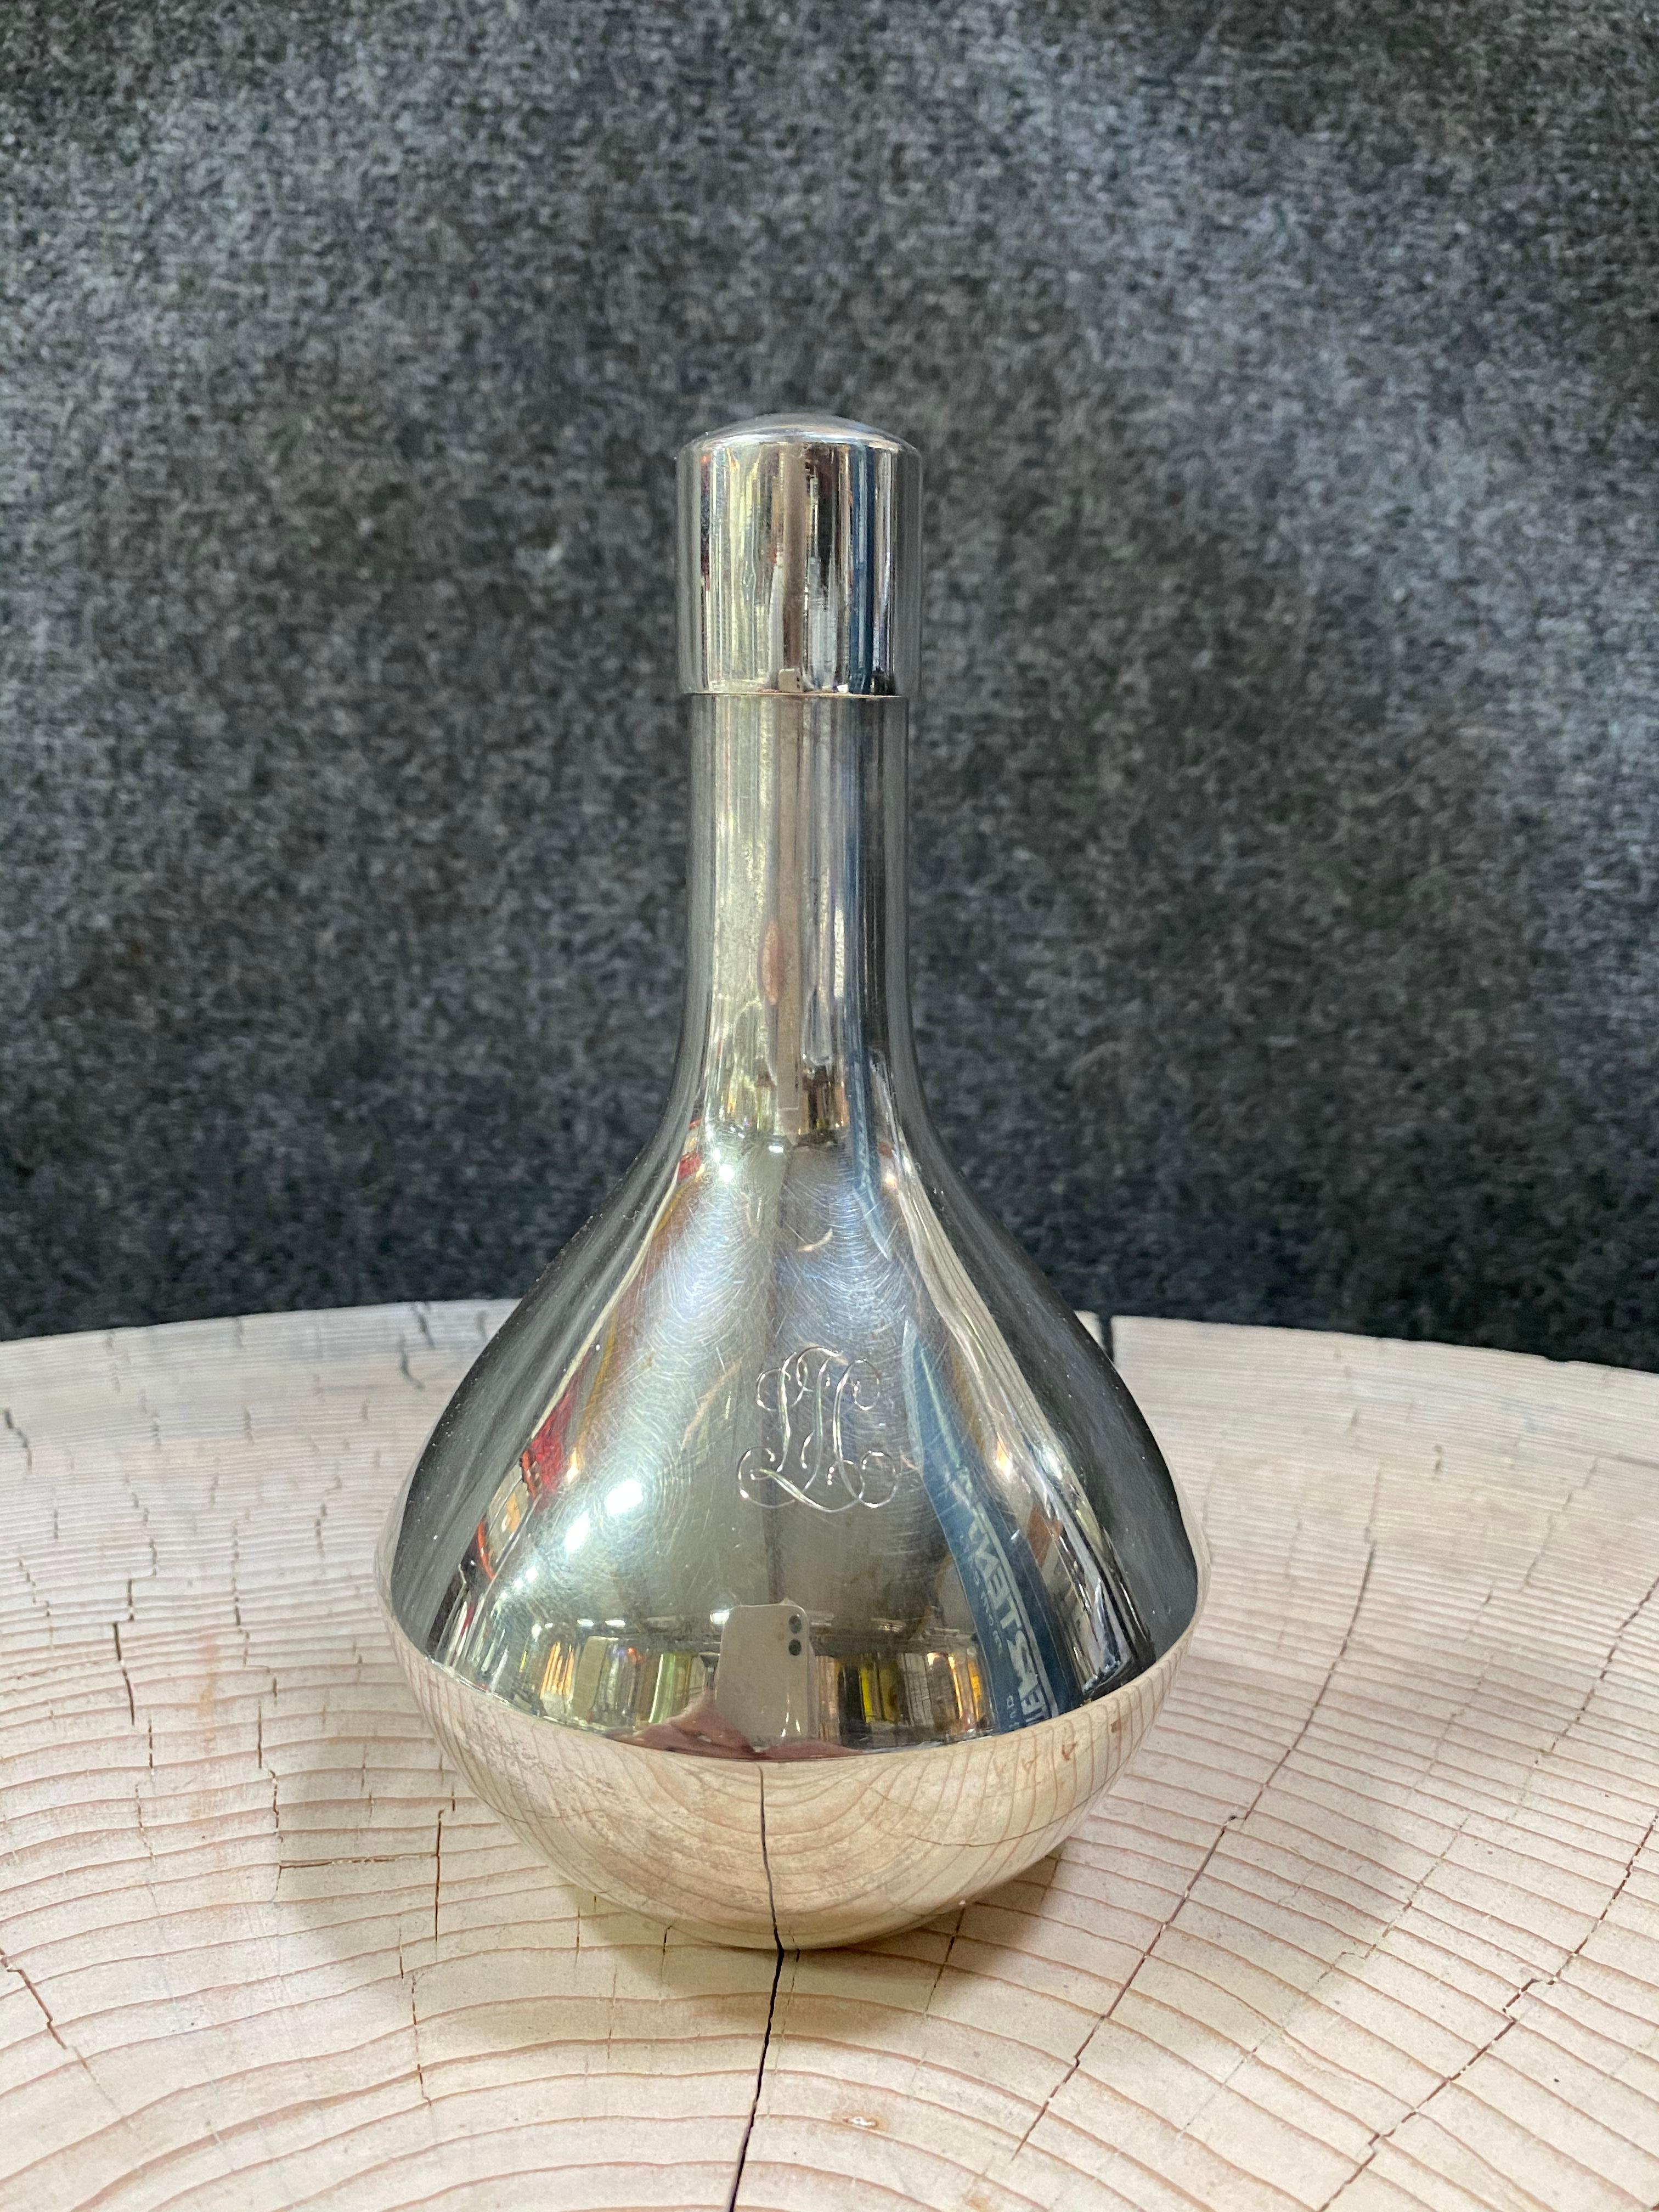 830 Silver Turku Finland Auran Kultaseppä Vodka Set
Silver proof 830  decanter made 1990 and 6 mugs. 830 silver made 1978
Auran Kultaseppä Turku Finland
Author Aura goldsmith Turku Finland.
Monogram engraving on the bottle and at the bottom of the